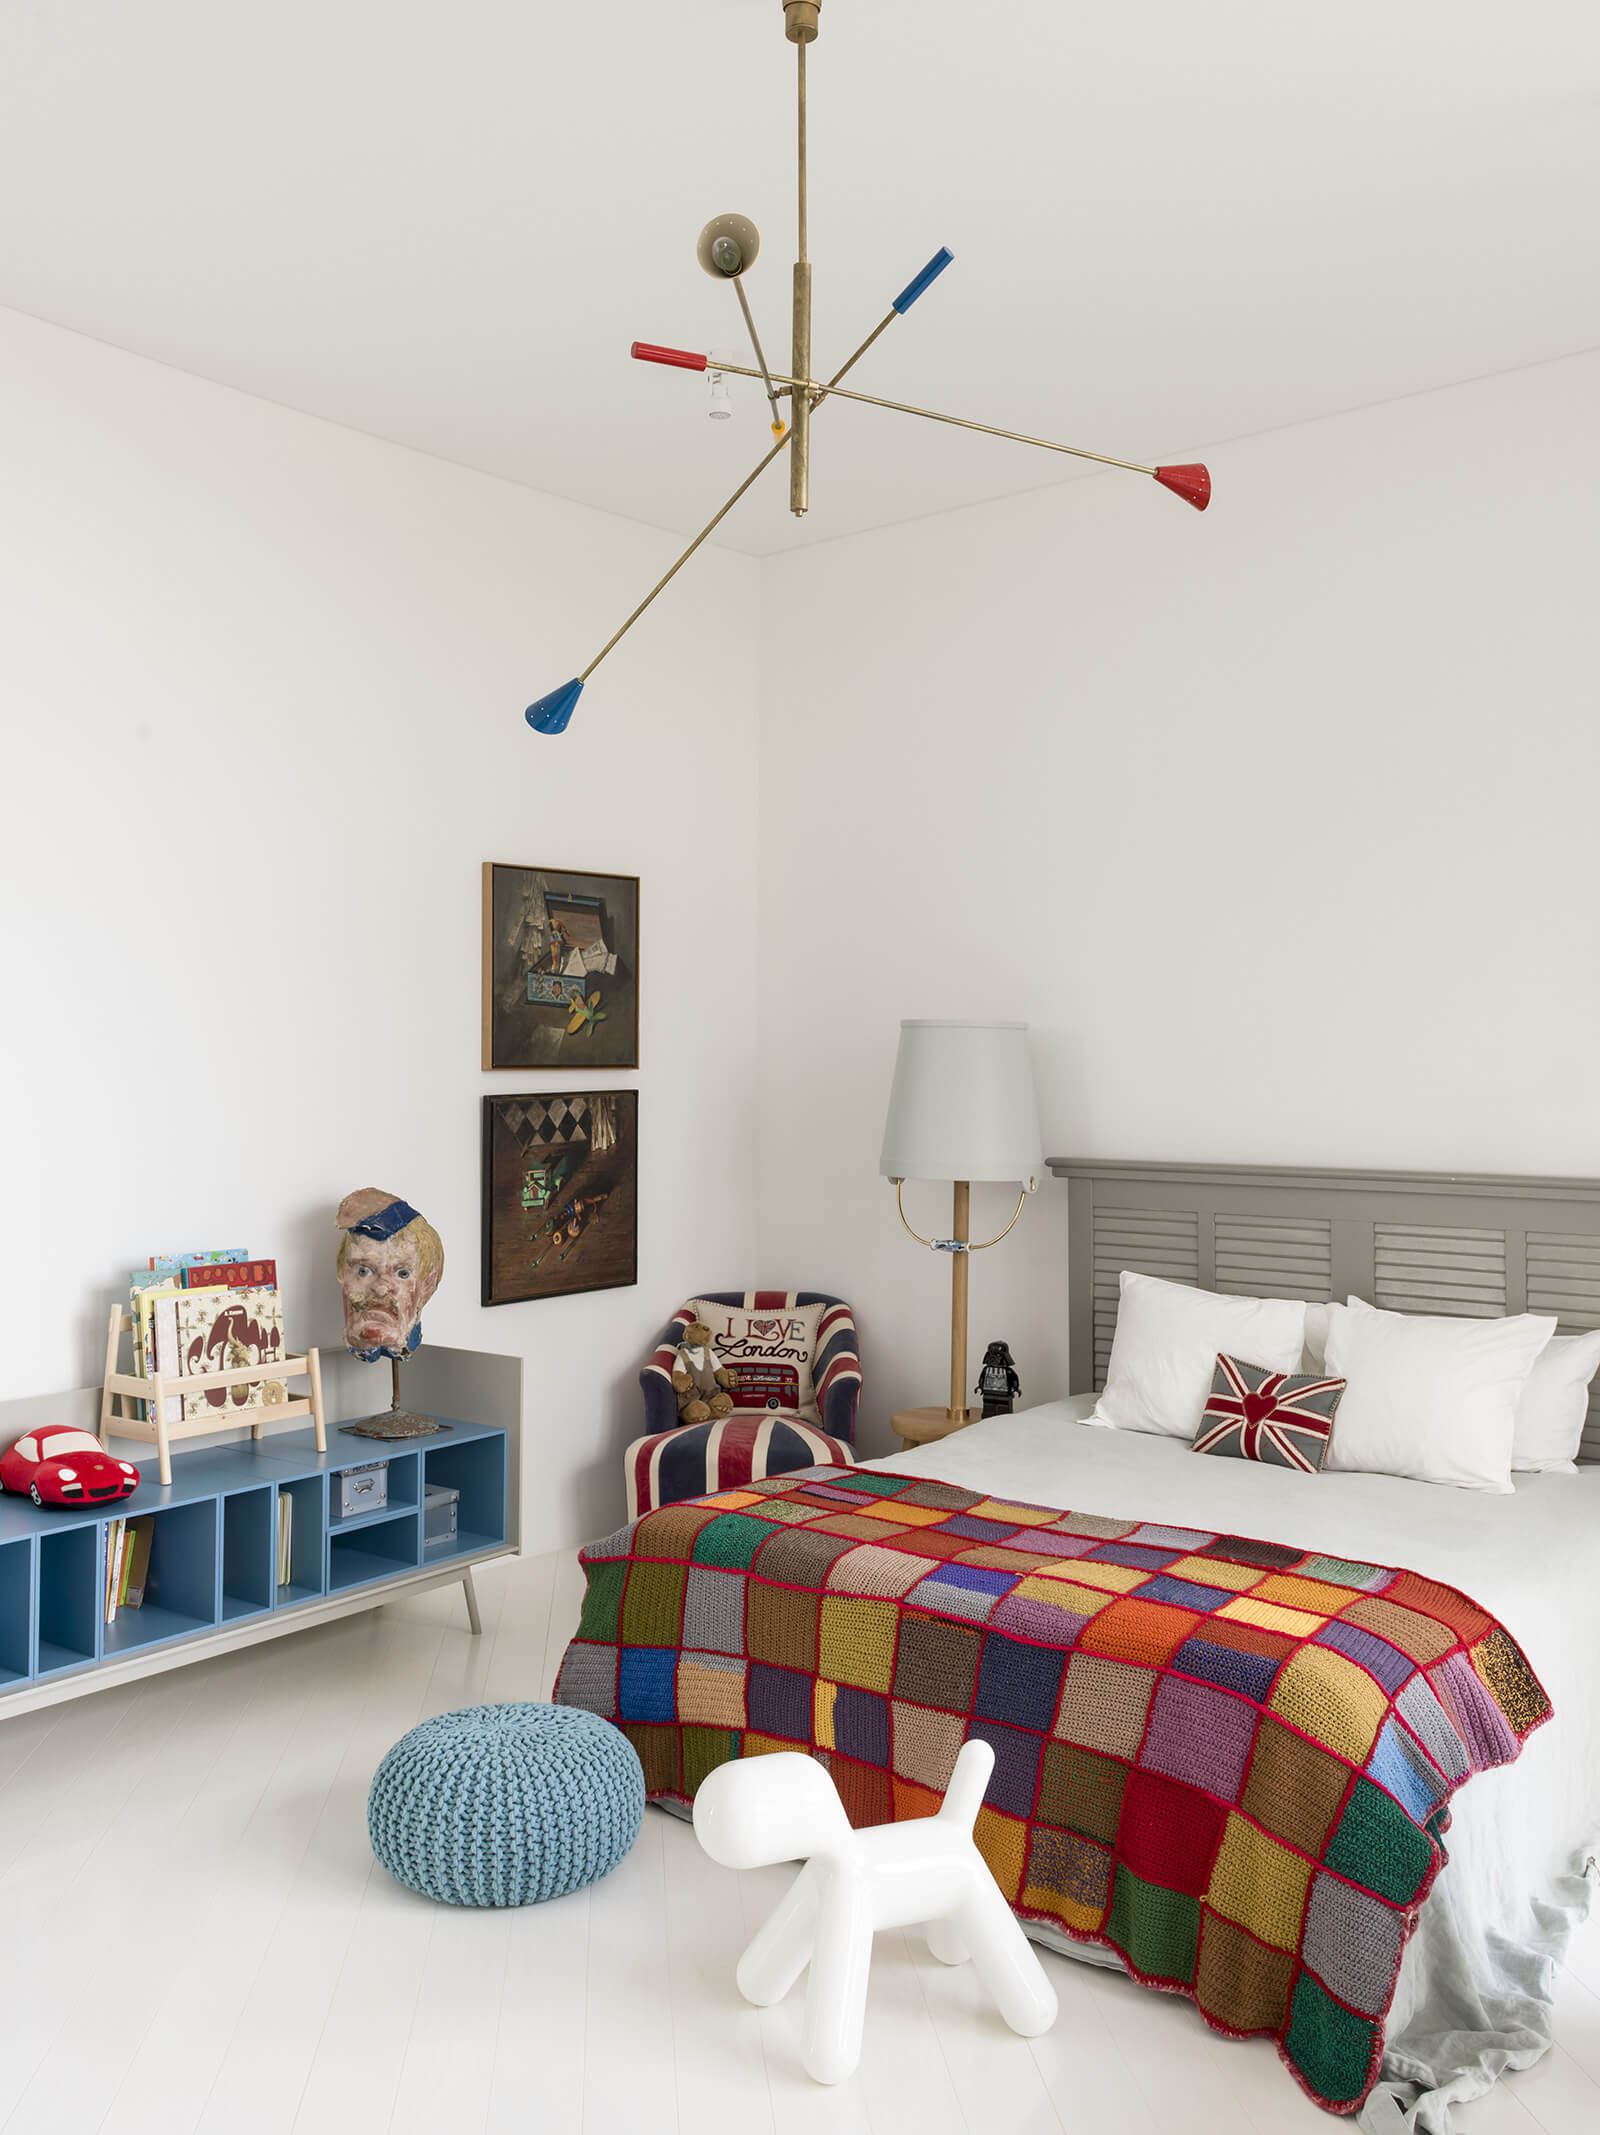 The children's bedroom showcases a similar eclectic design aesthetic as the rest of the home | Moscow Home| Anna Erman| STIRworld